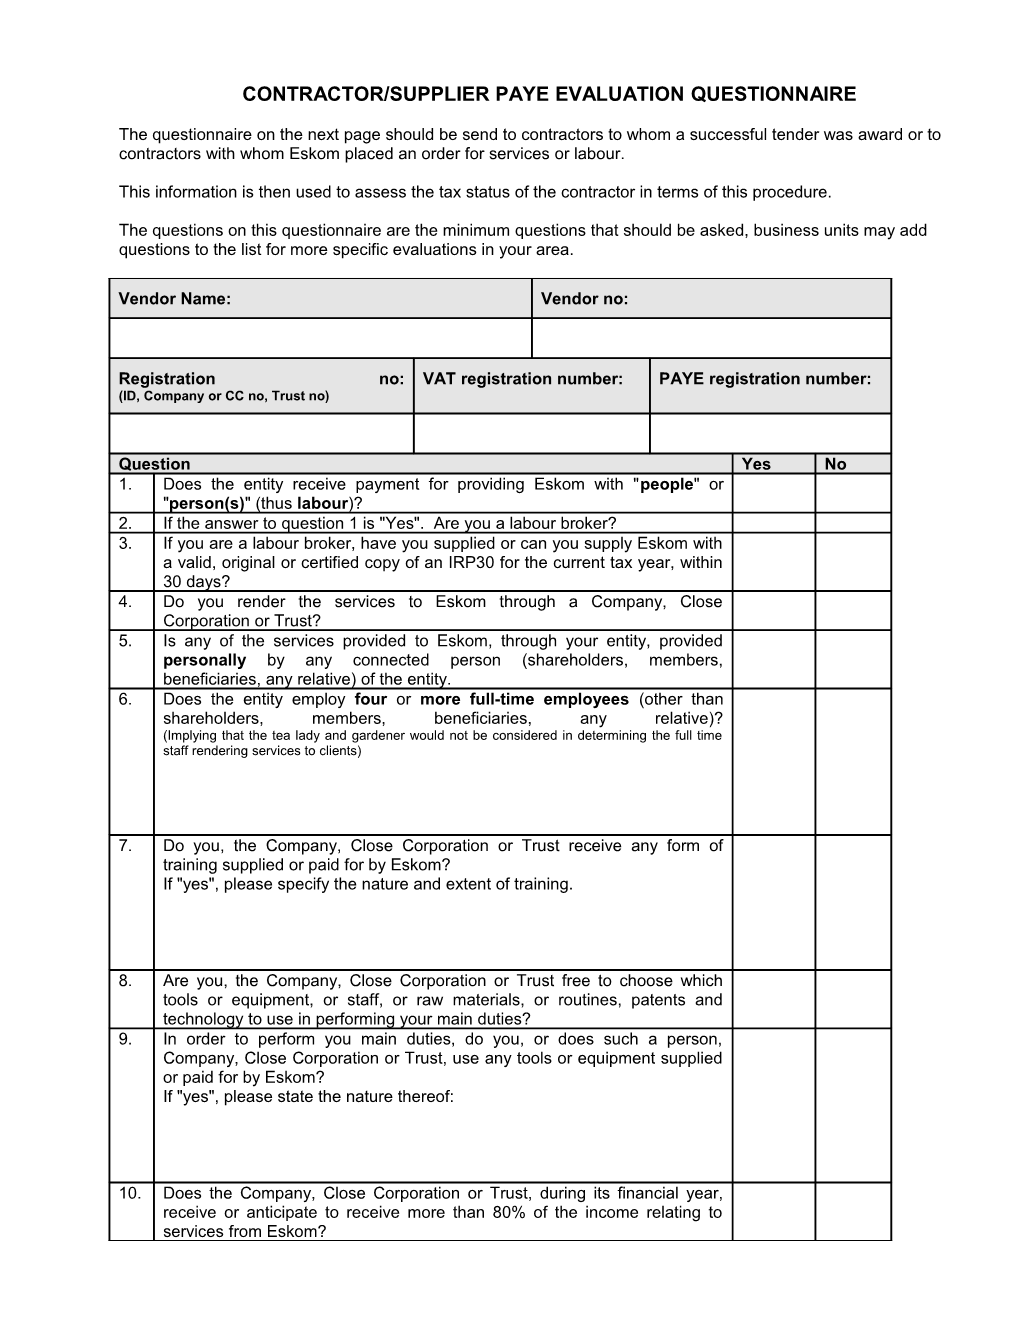 Contractor/Supplier Paye Evaluation Questionnaire